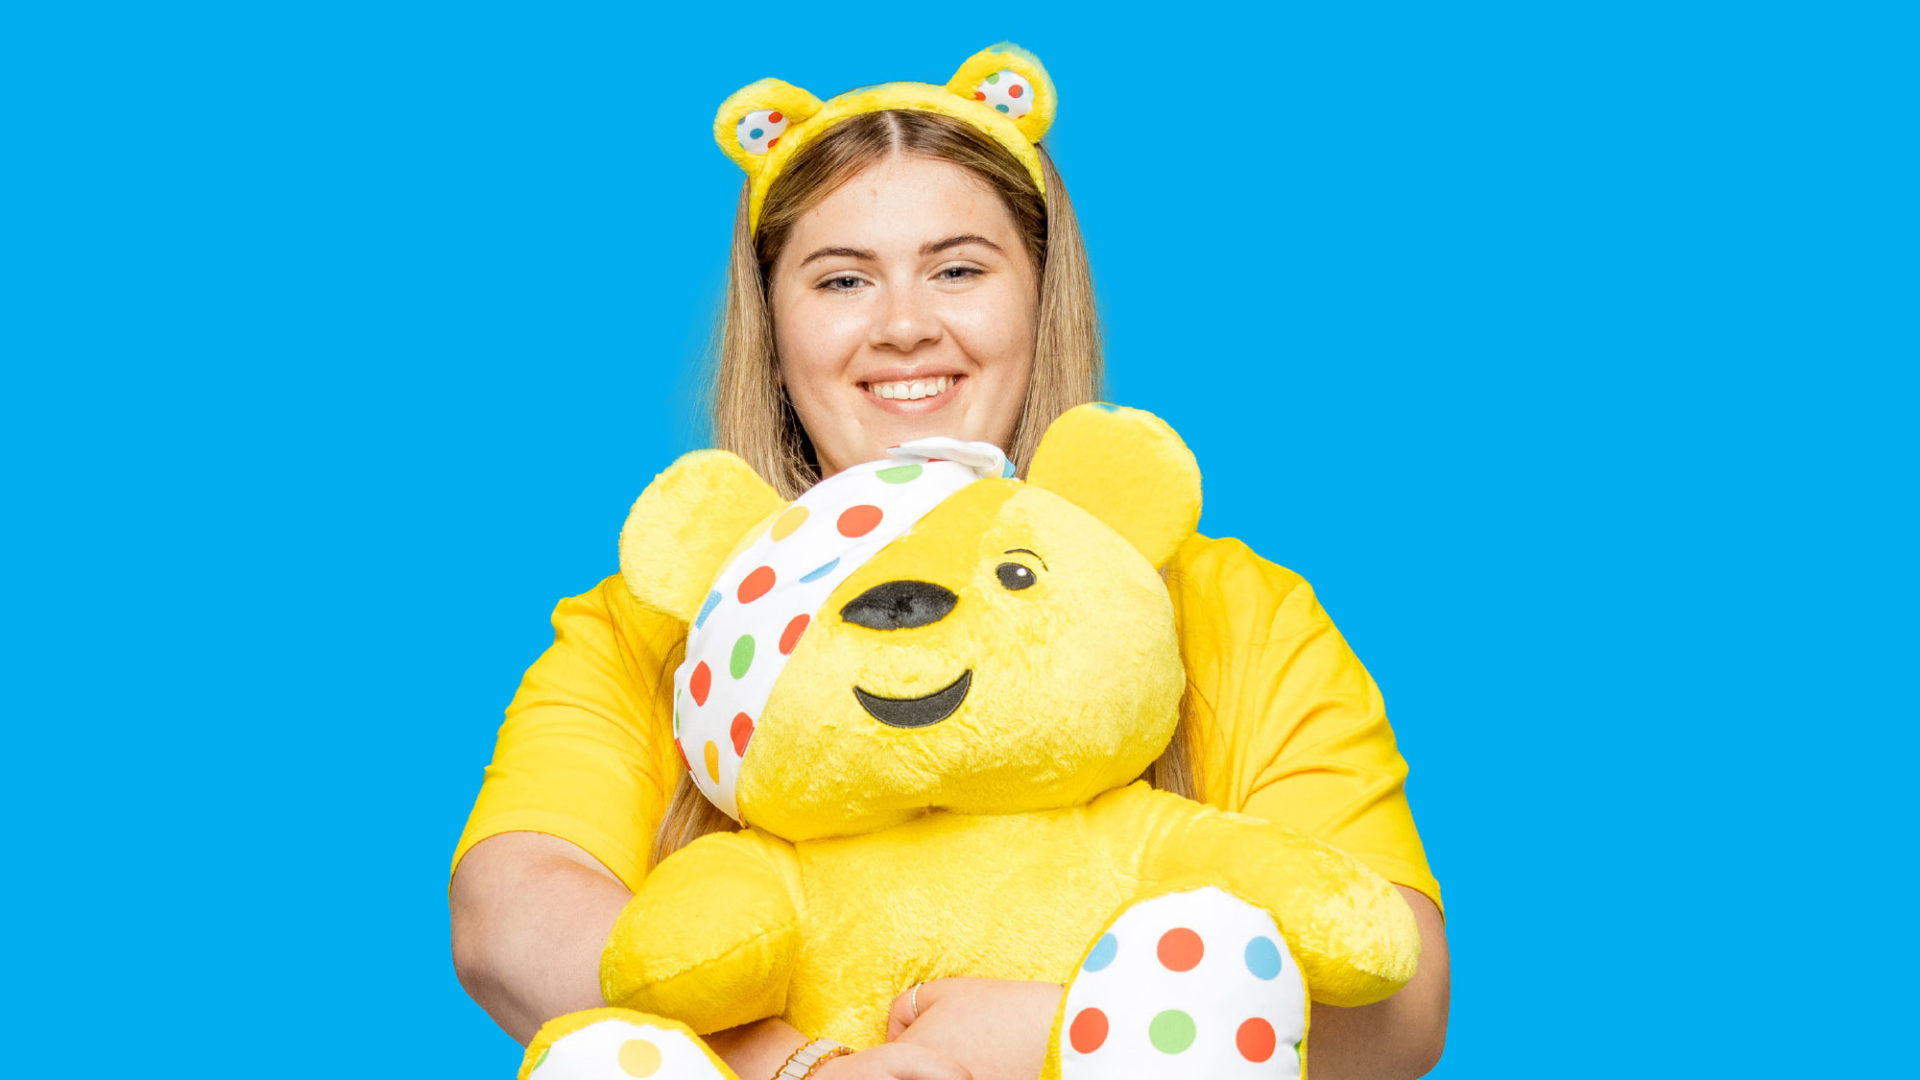 Roisin holding a pudsey bear toy and wearing ears